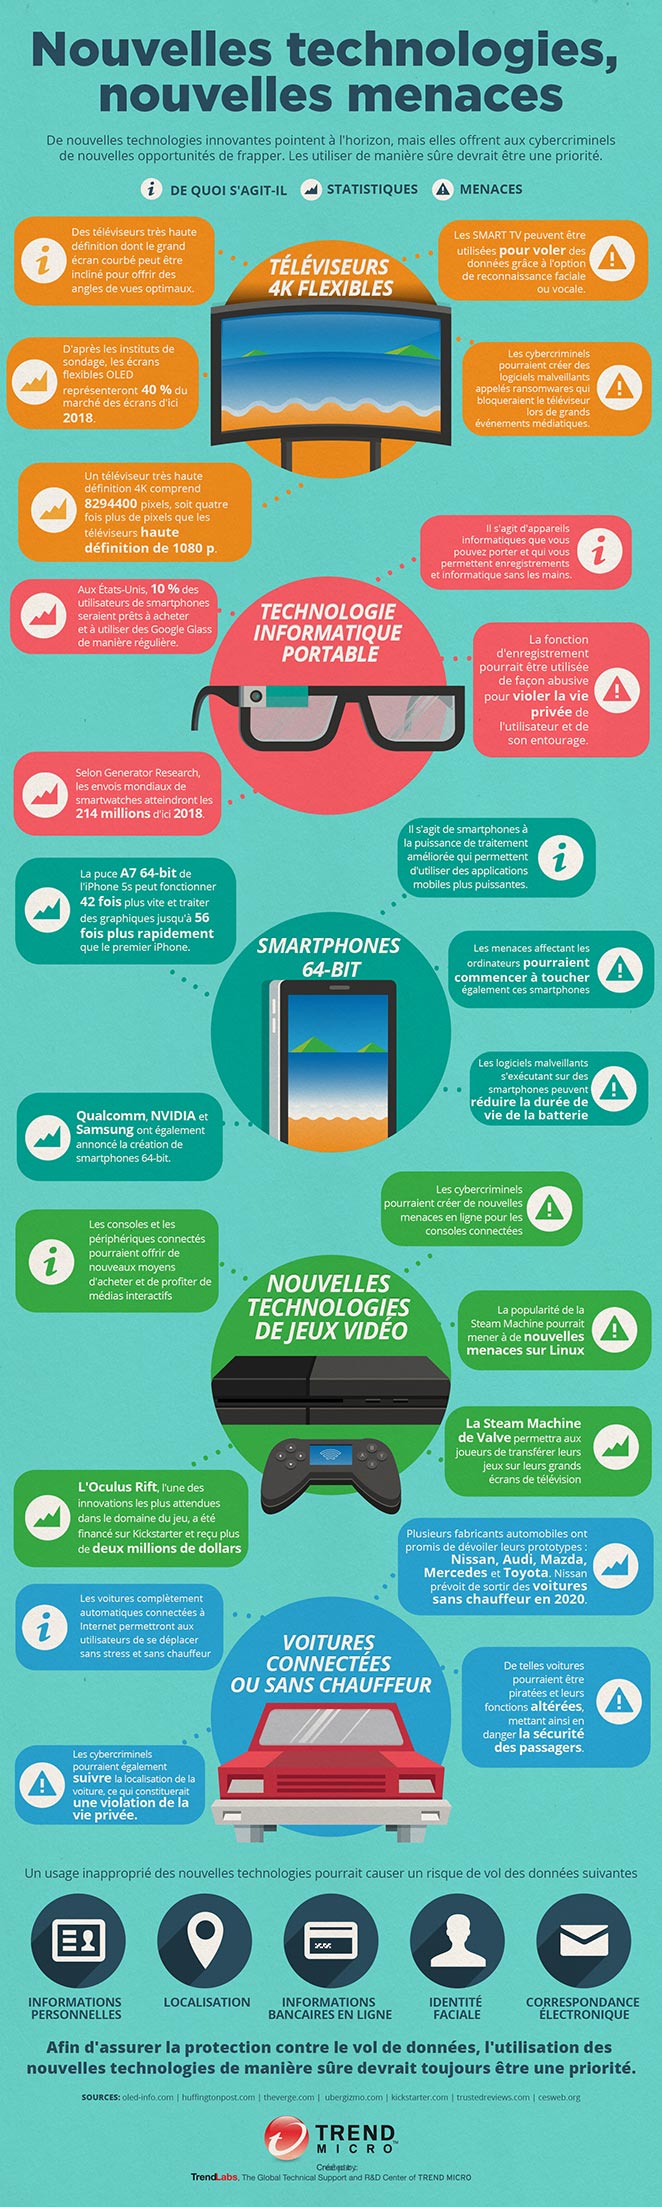 16 infographic-new-technologies-fr